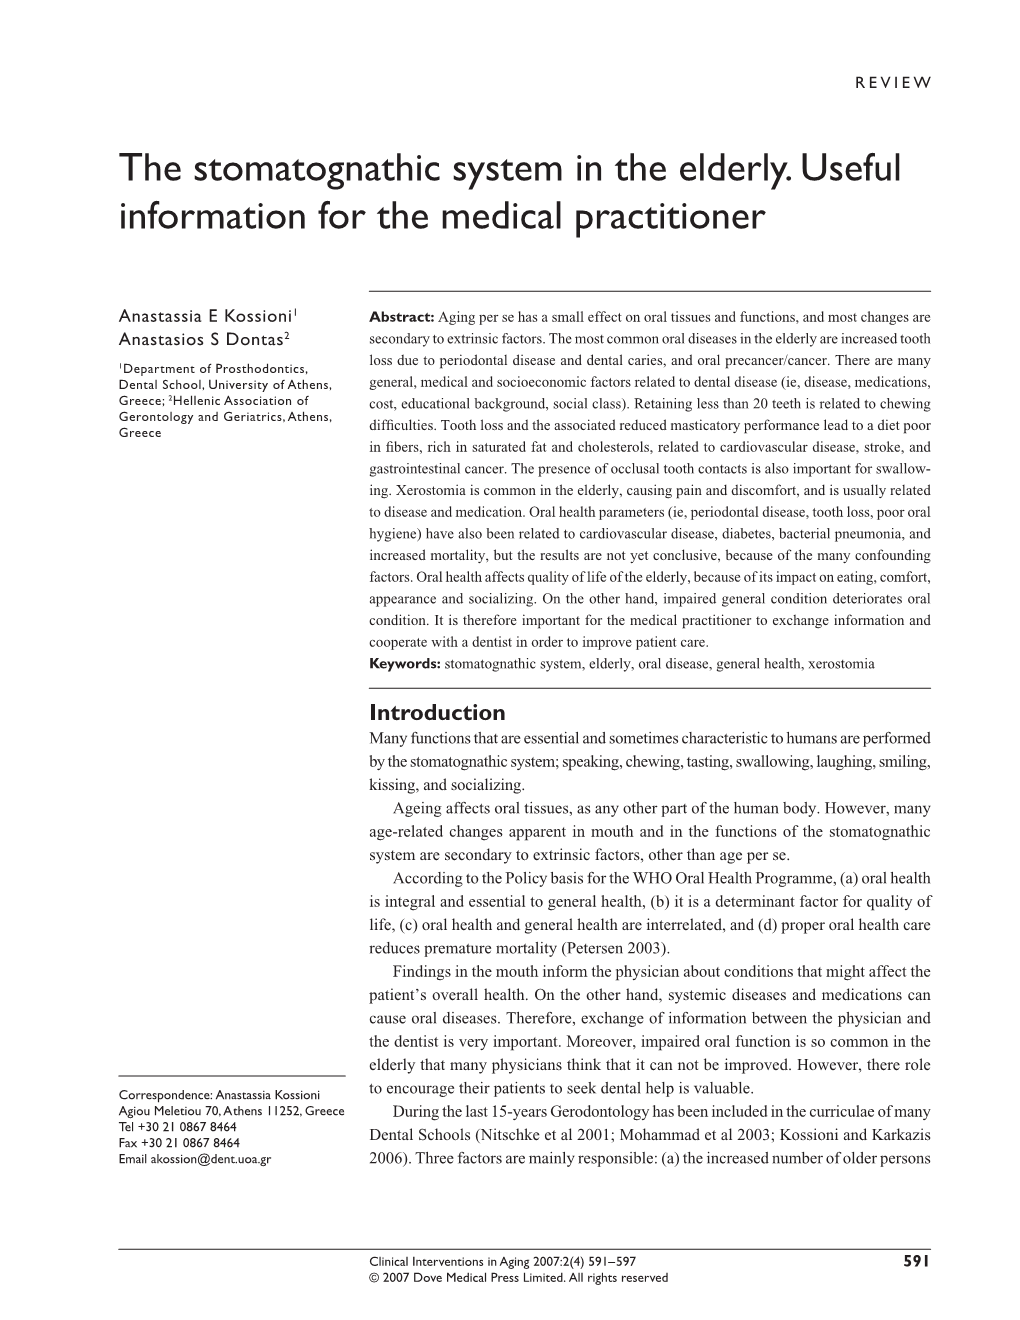 The Stomatognathic System in the Elderly. Useful Information for the Medical Practitioner